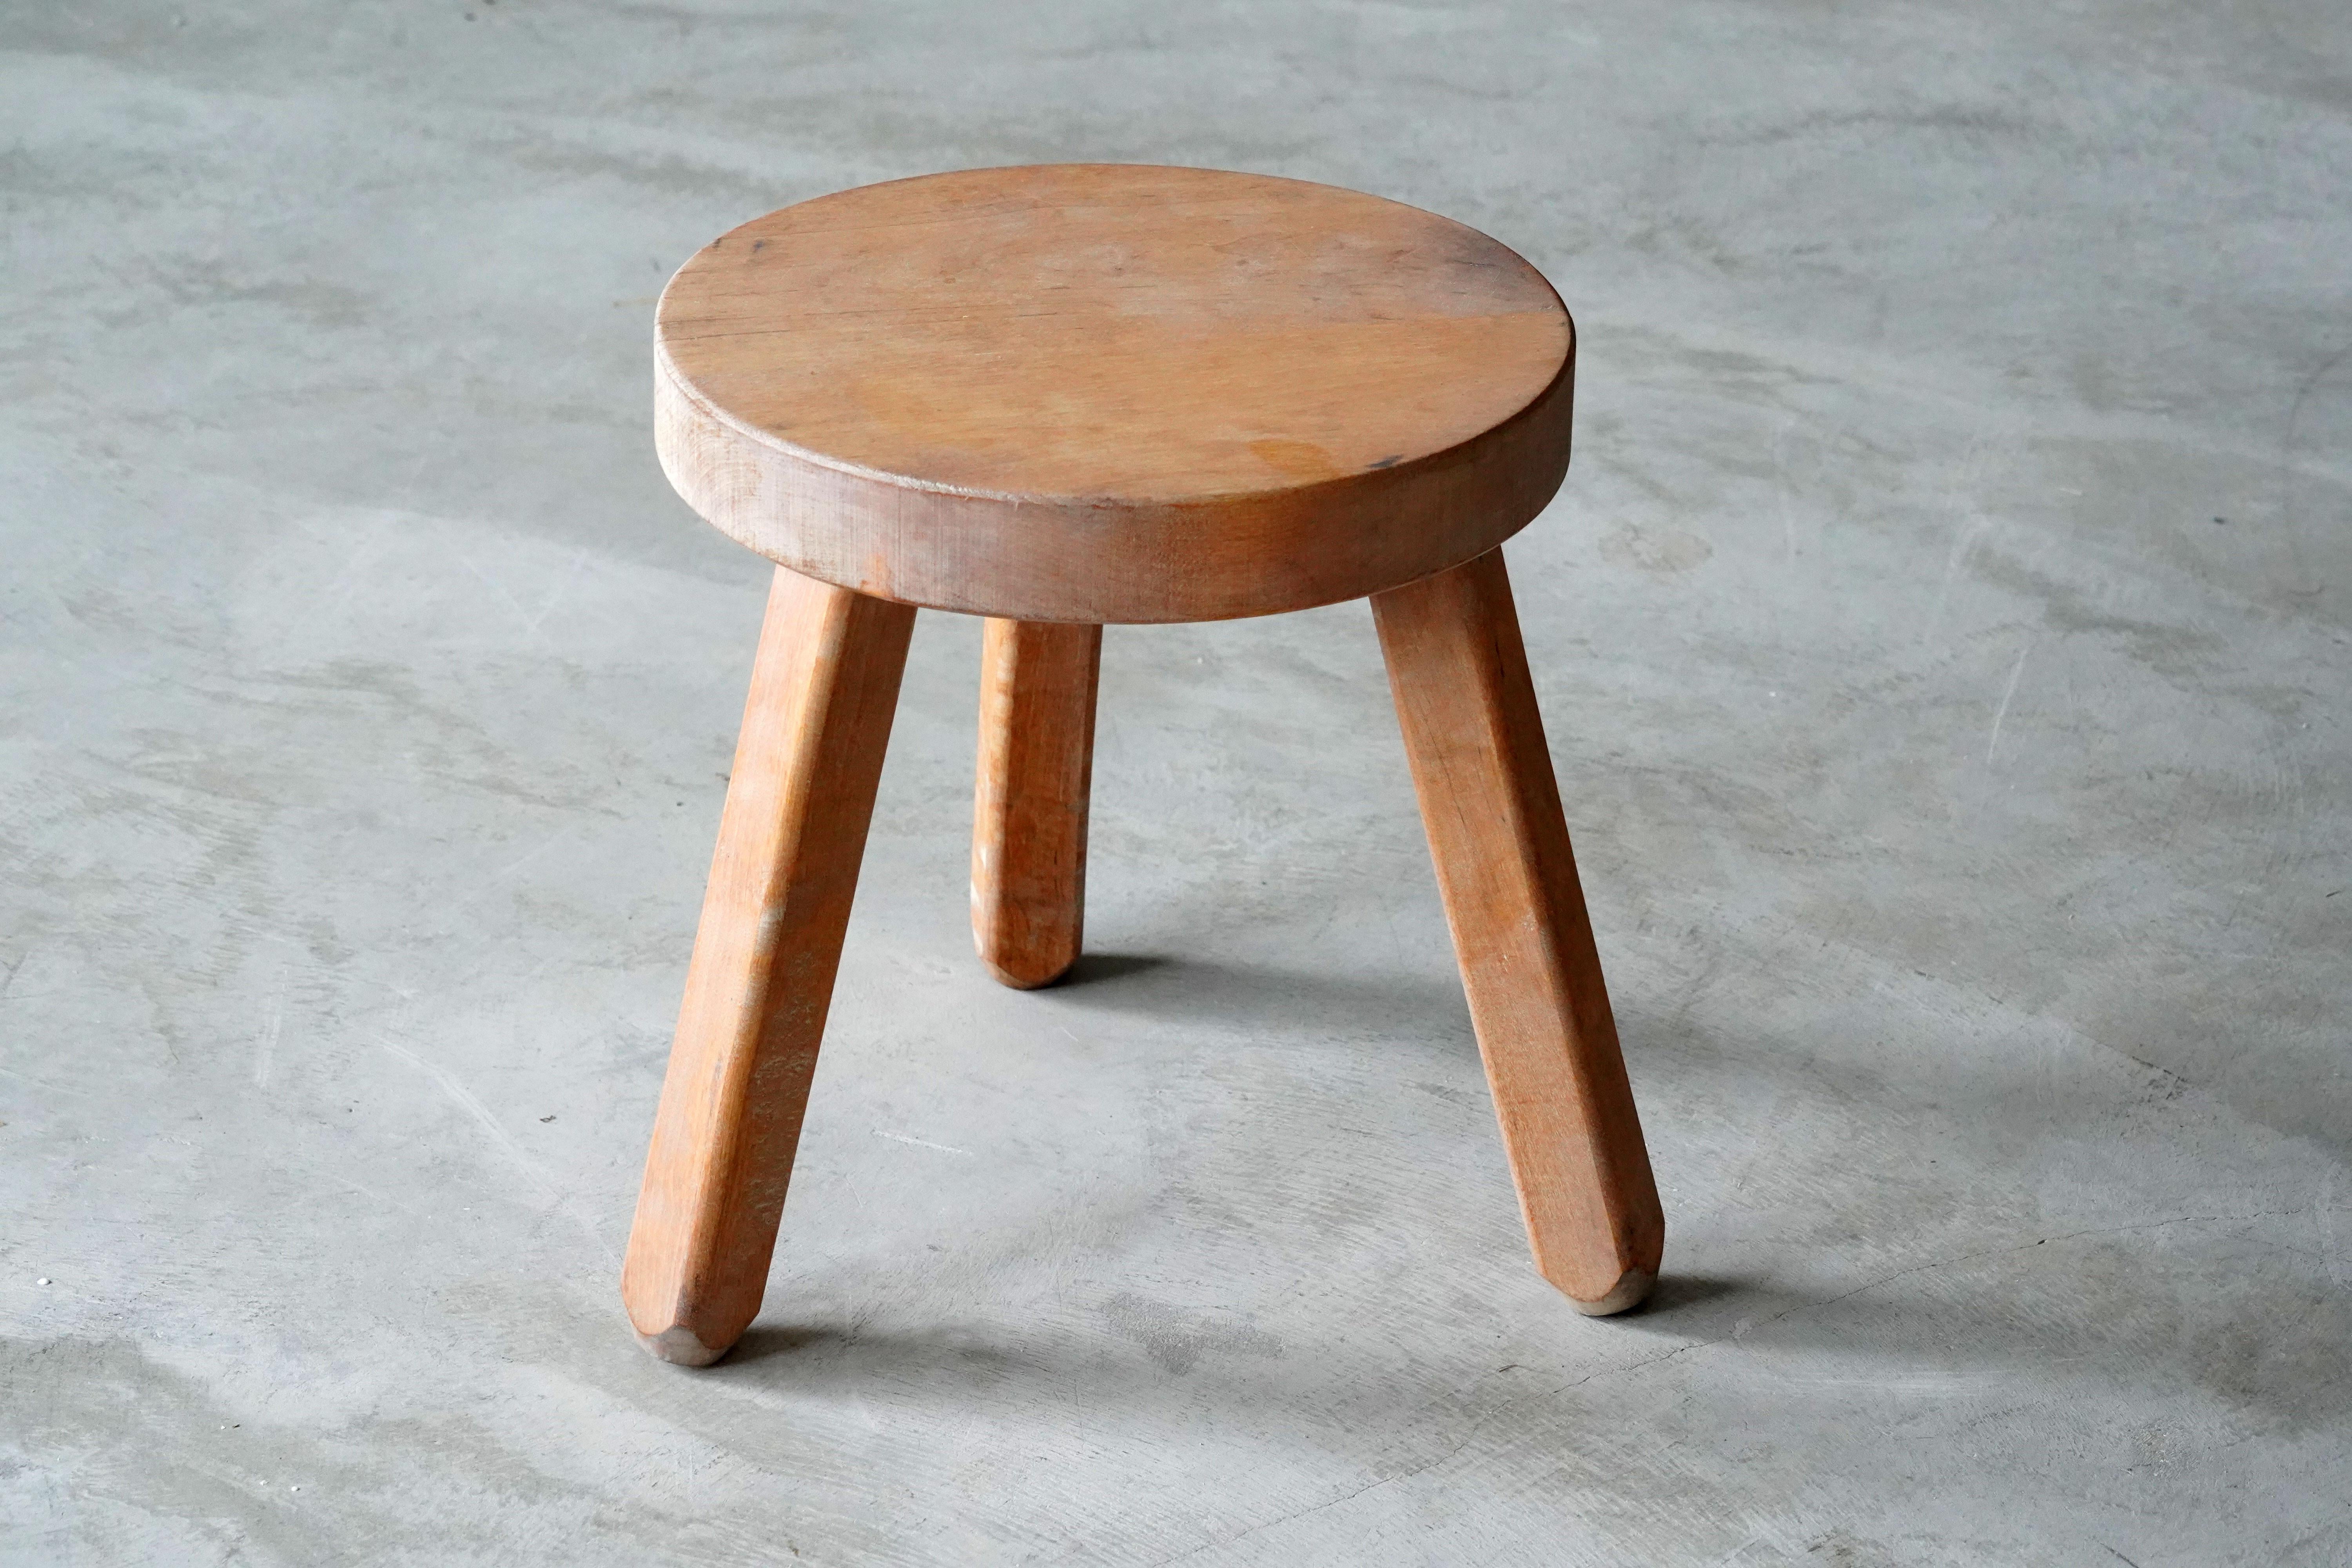 A Swedish Birch stool or side table. By unknown designer, 1970s. Purity of form enhances the beauty of wood. 

Other designers working in similar style and materials include Axel Einar Hjorth, Roland Wilhelmsson, Pierre Chapo, and Charlotte